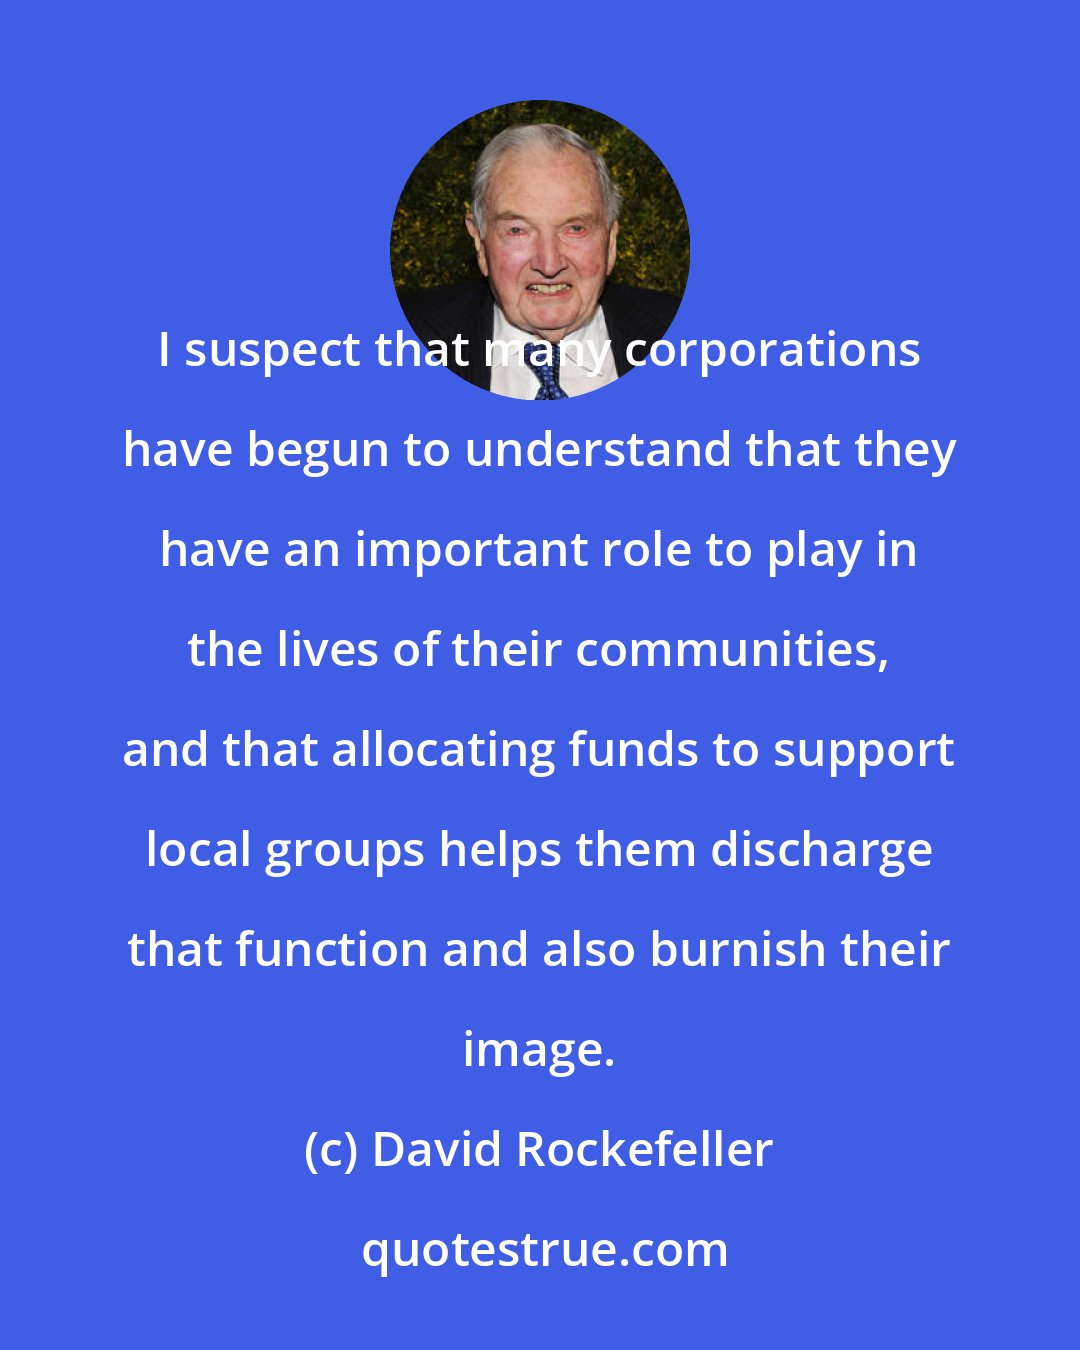 David Rockefeller: I suspect that many corporations have begun to understand that they have an important role to play in the lives of their communities, and that allocating funds to support local groups helps them discharge that function and also burnish their image.